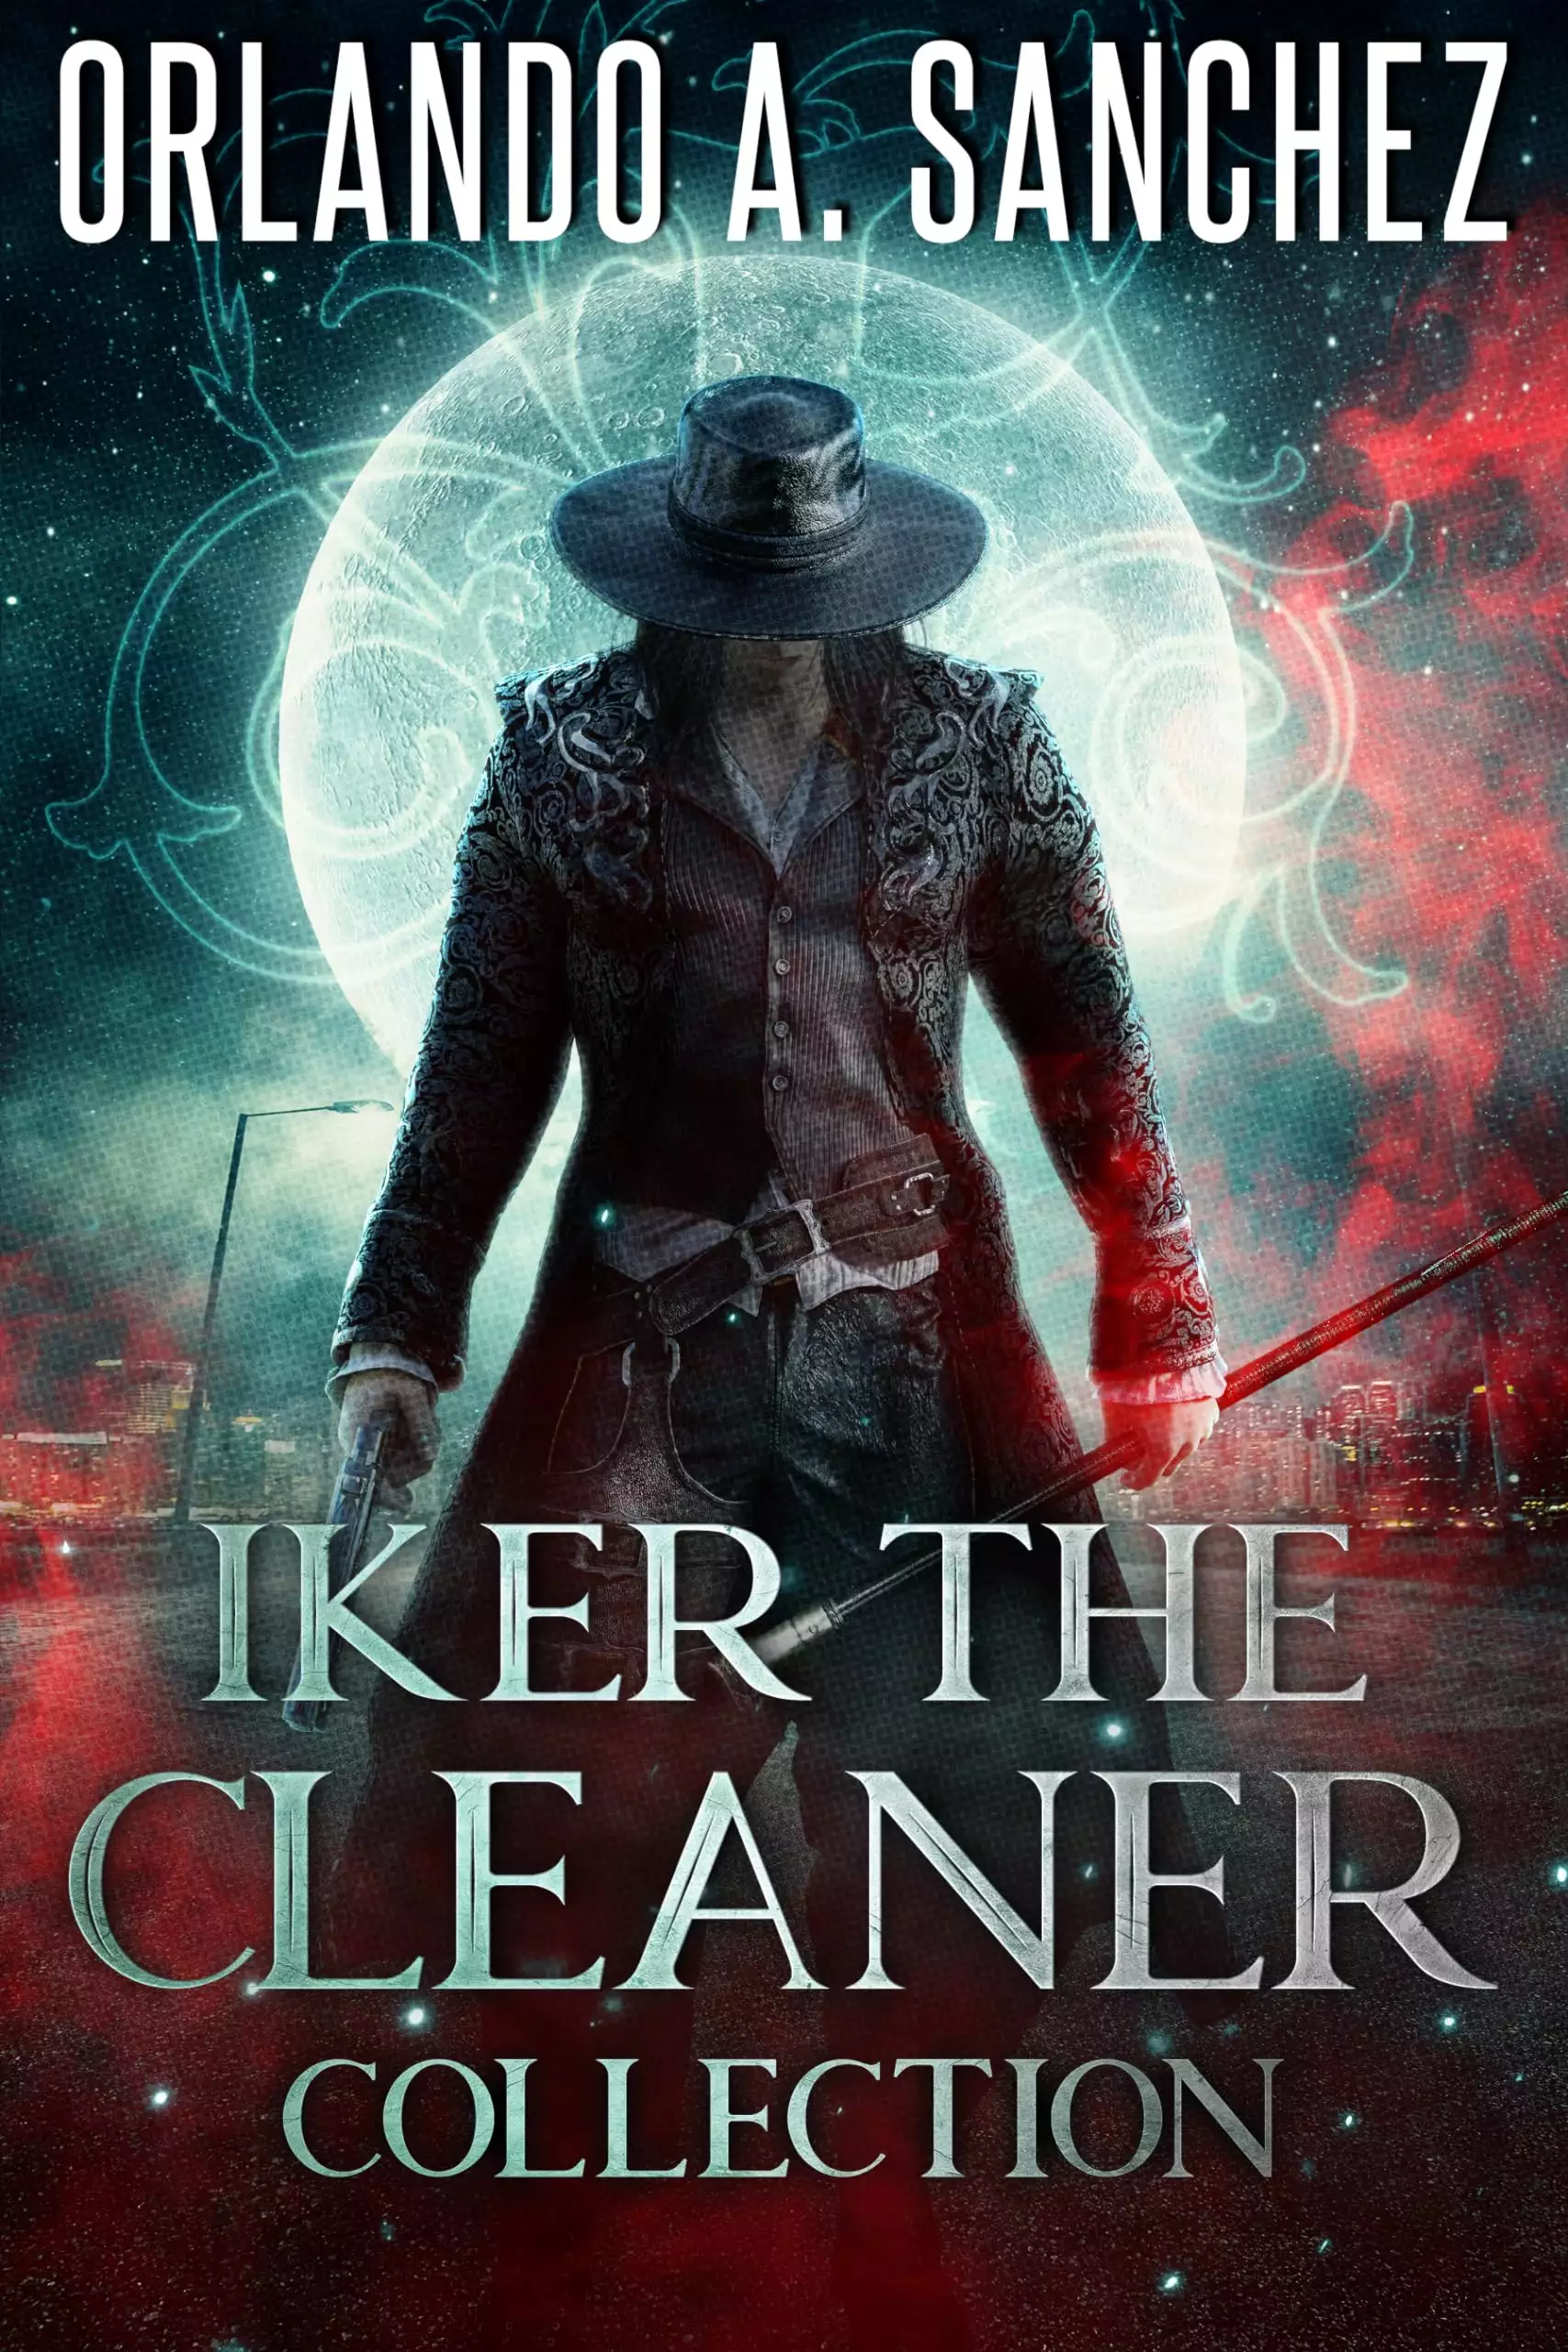 Iker the Cleaner Boxset: Iker the Cleaner Books 1-3